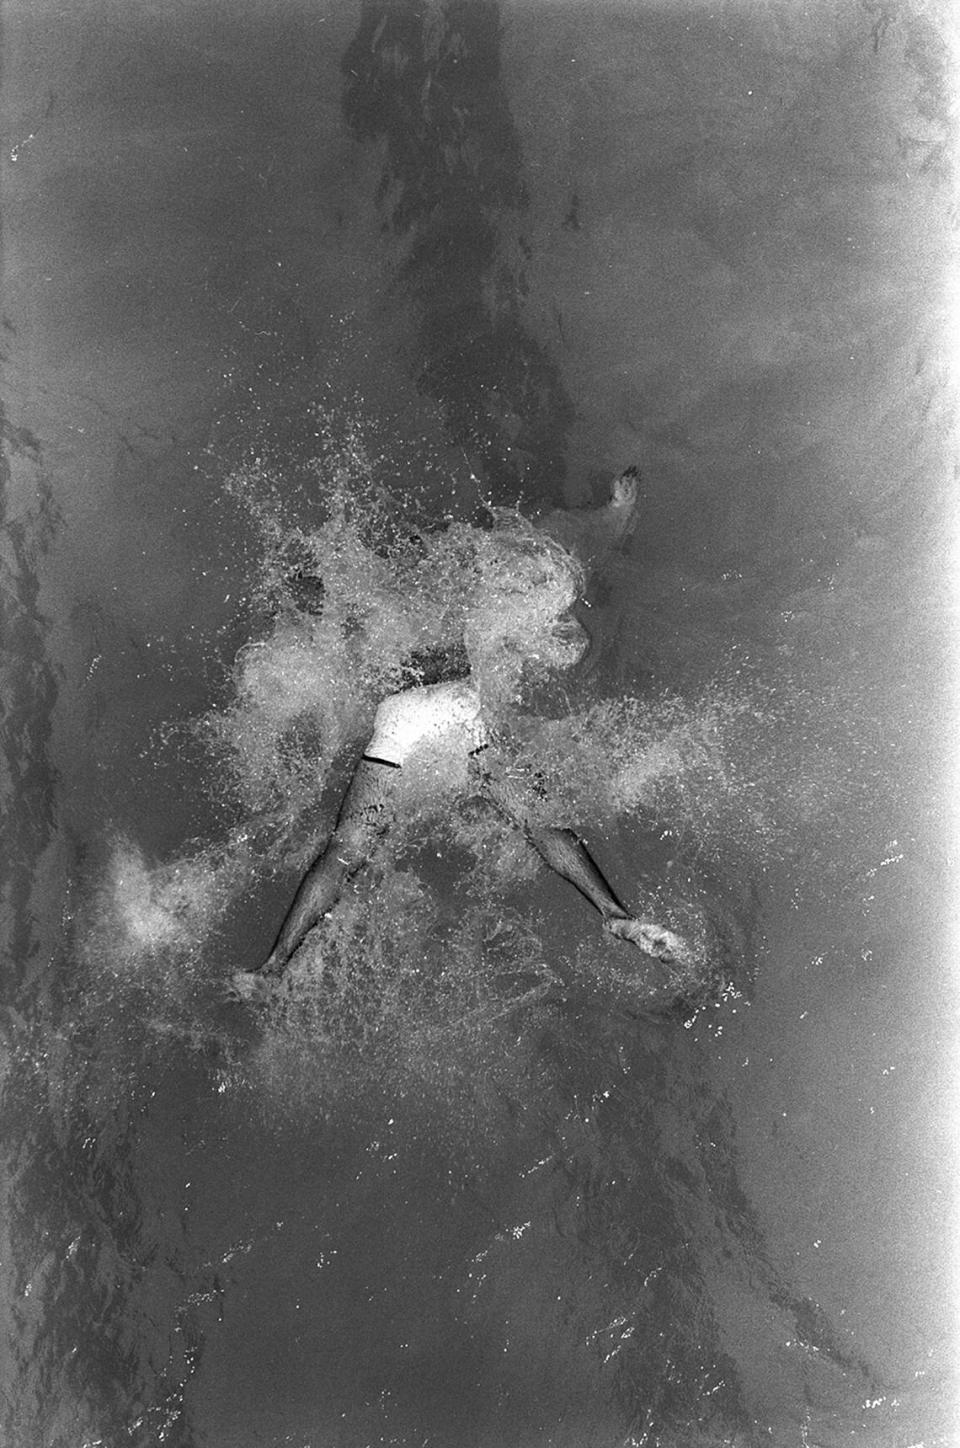 June 27, 1980: A University of Texas at Arlington student participates in the non-invitational belly flop competition on campus during a heat wave. Jerry W. Hoefer/Fort Worth Star-Telegram archive/UT Arlington Special Collections